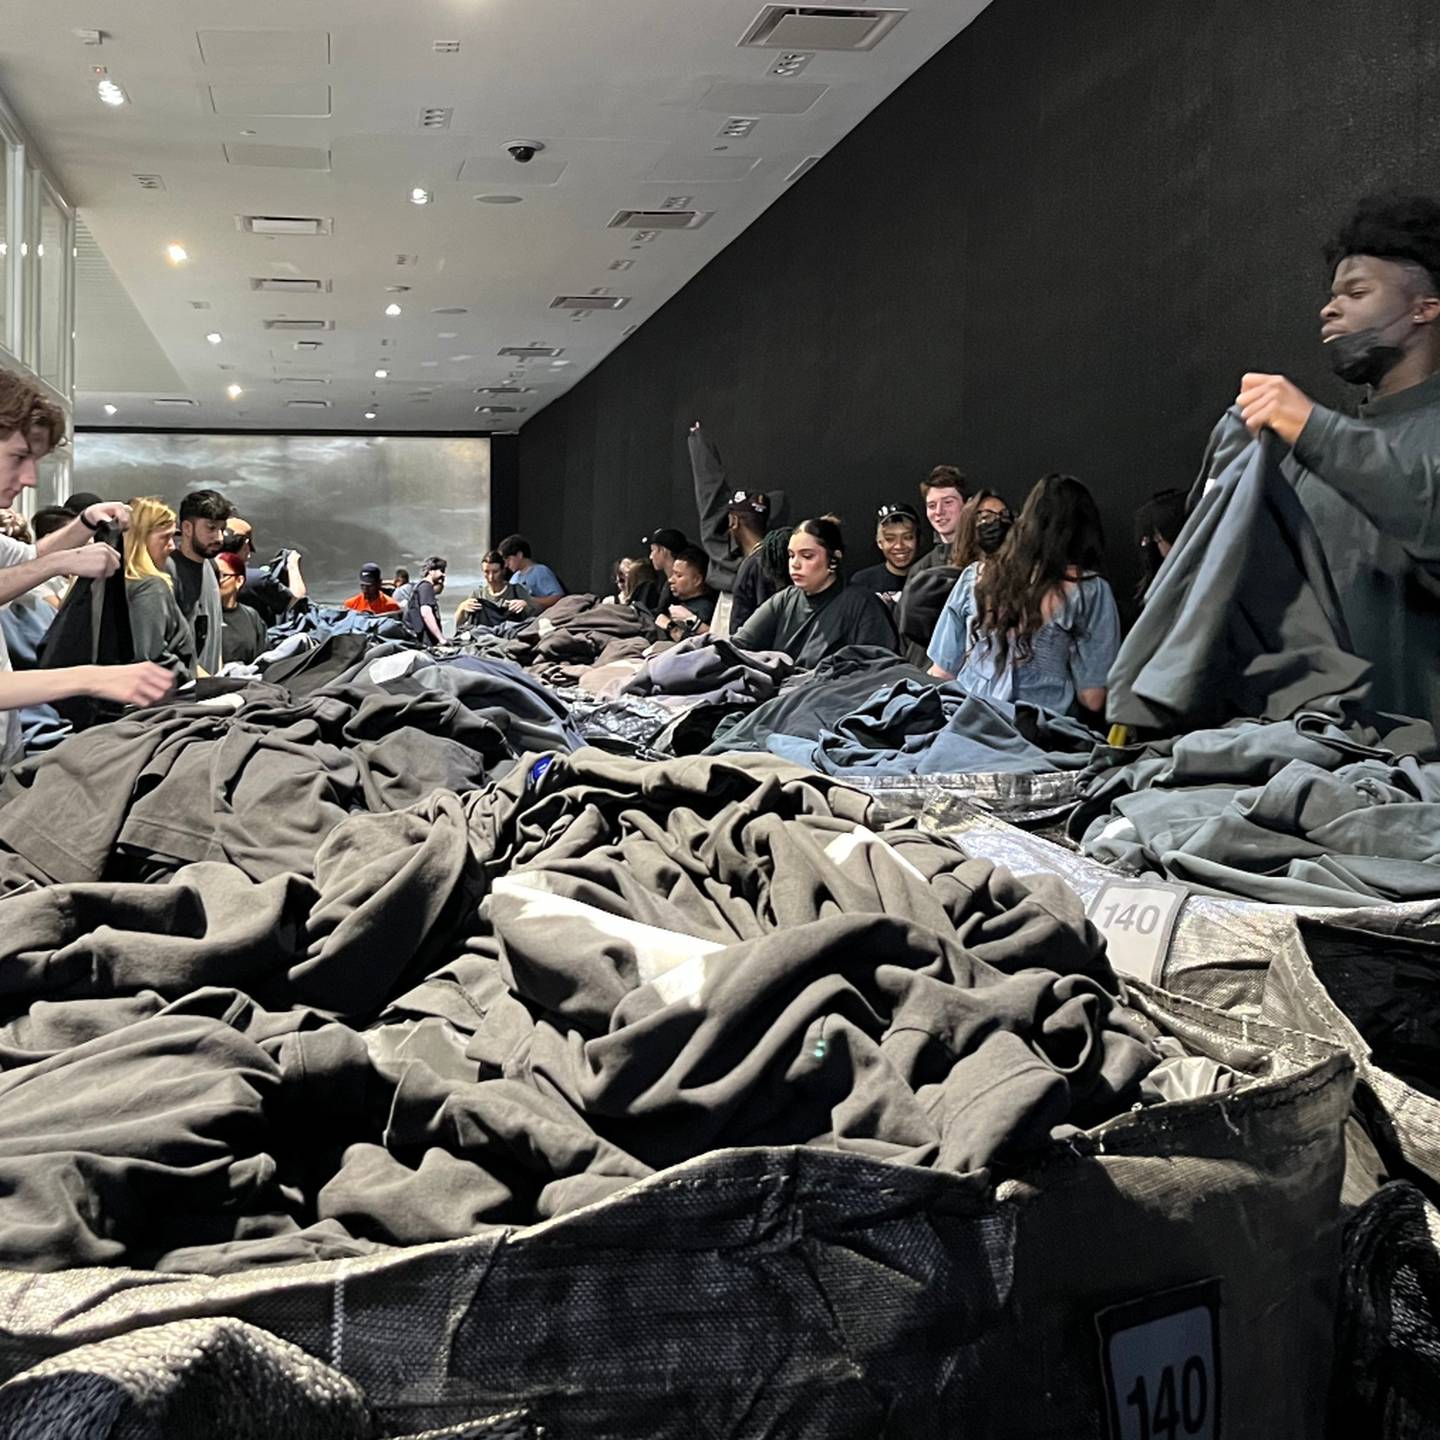 Yeezy Gap Brings a Dystopian Retail Experience to Stores | BoF